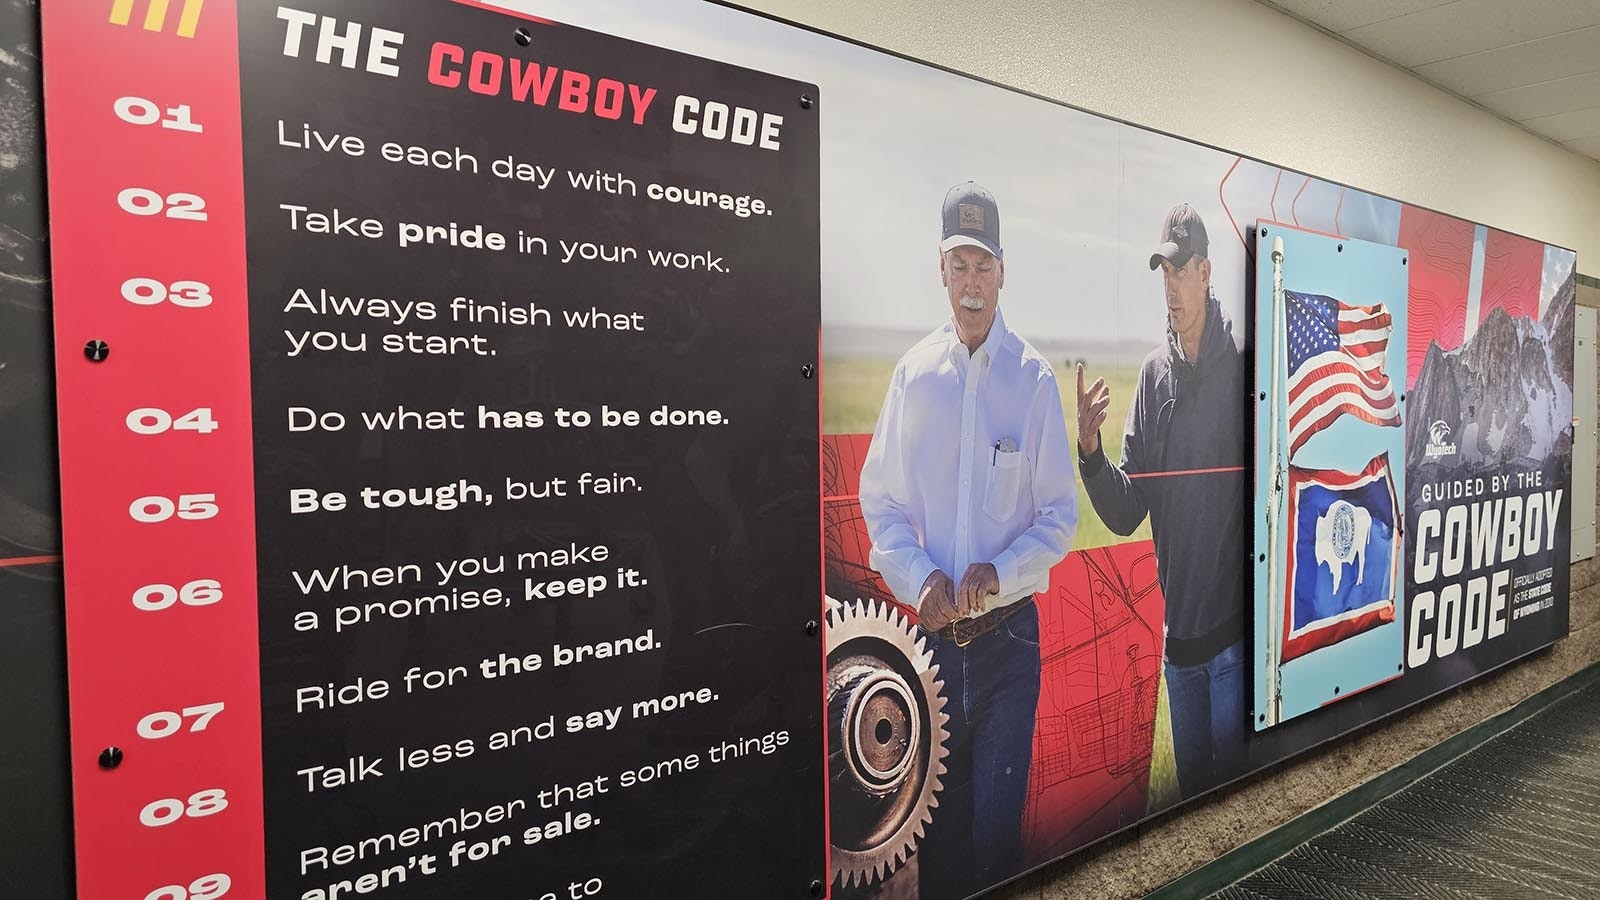 The Cowboy Code is an integral part of the lessons taught at WyoTech in Laramie.